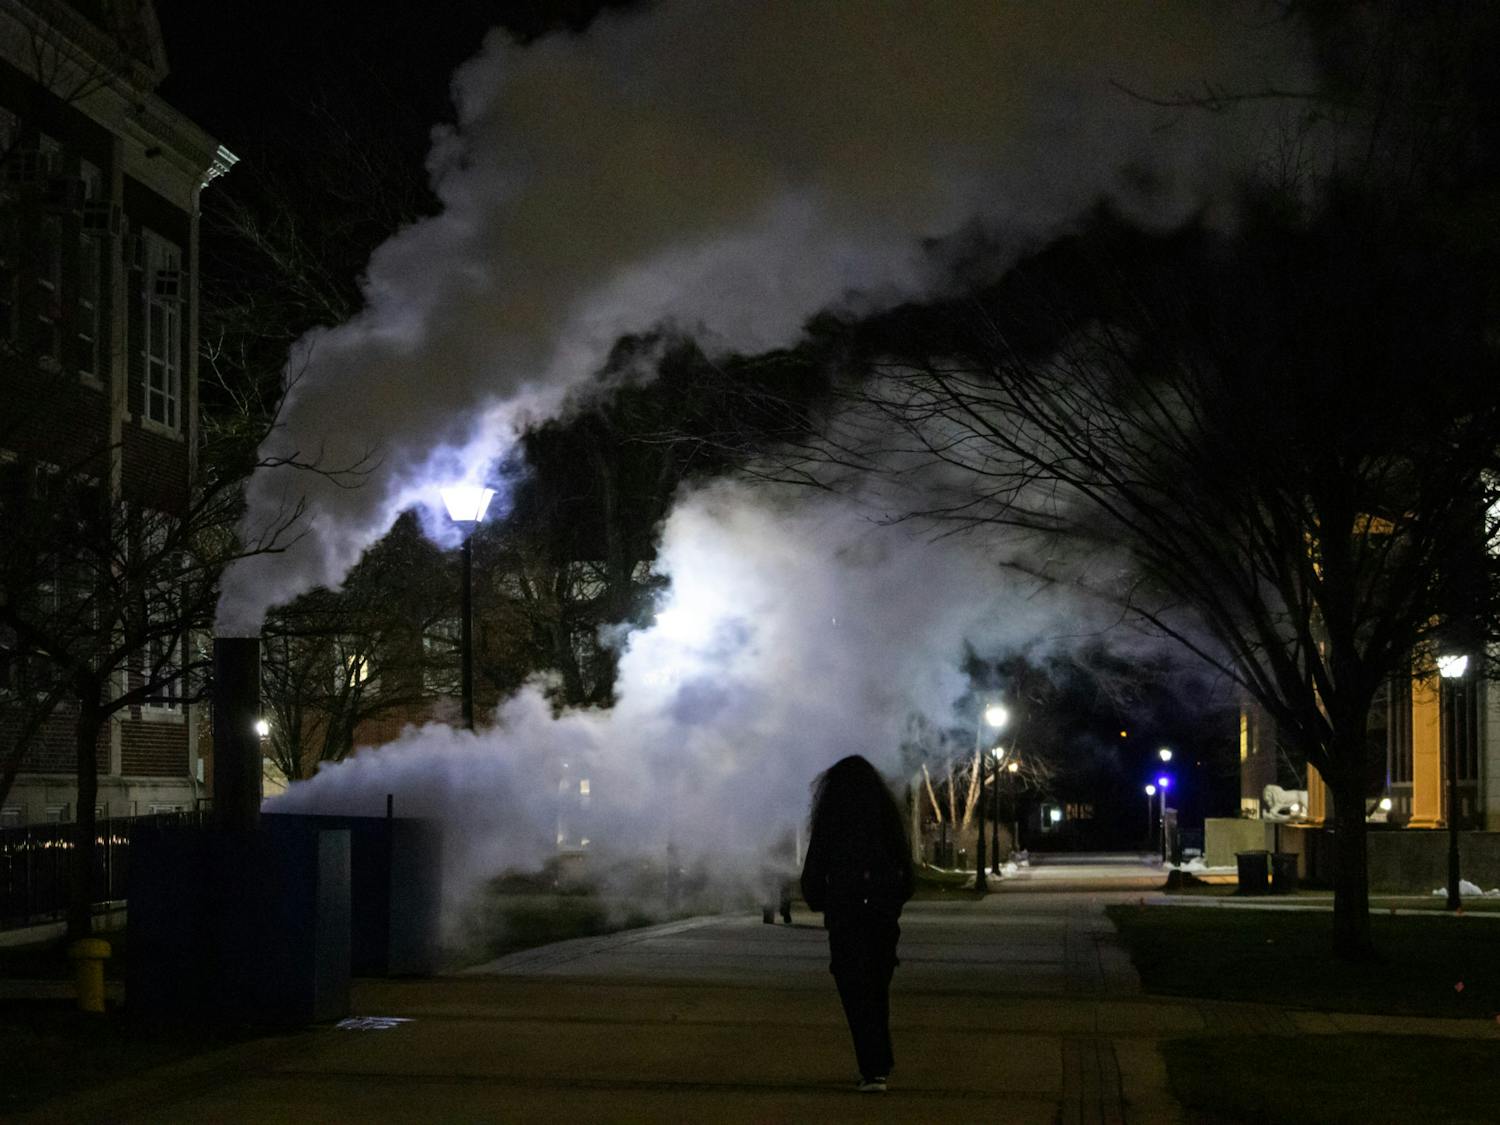 The steam has caused some confusion among students, and some are curious as to why the steam is being released in this manner (Photo by Shane Gillespie).